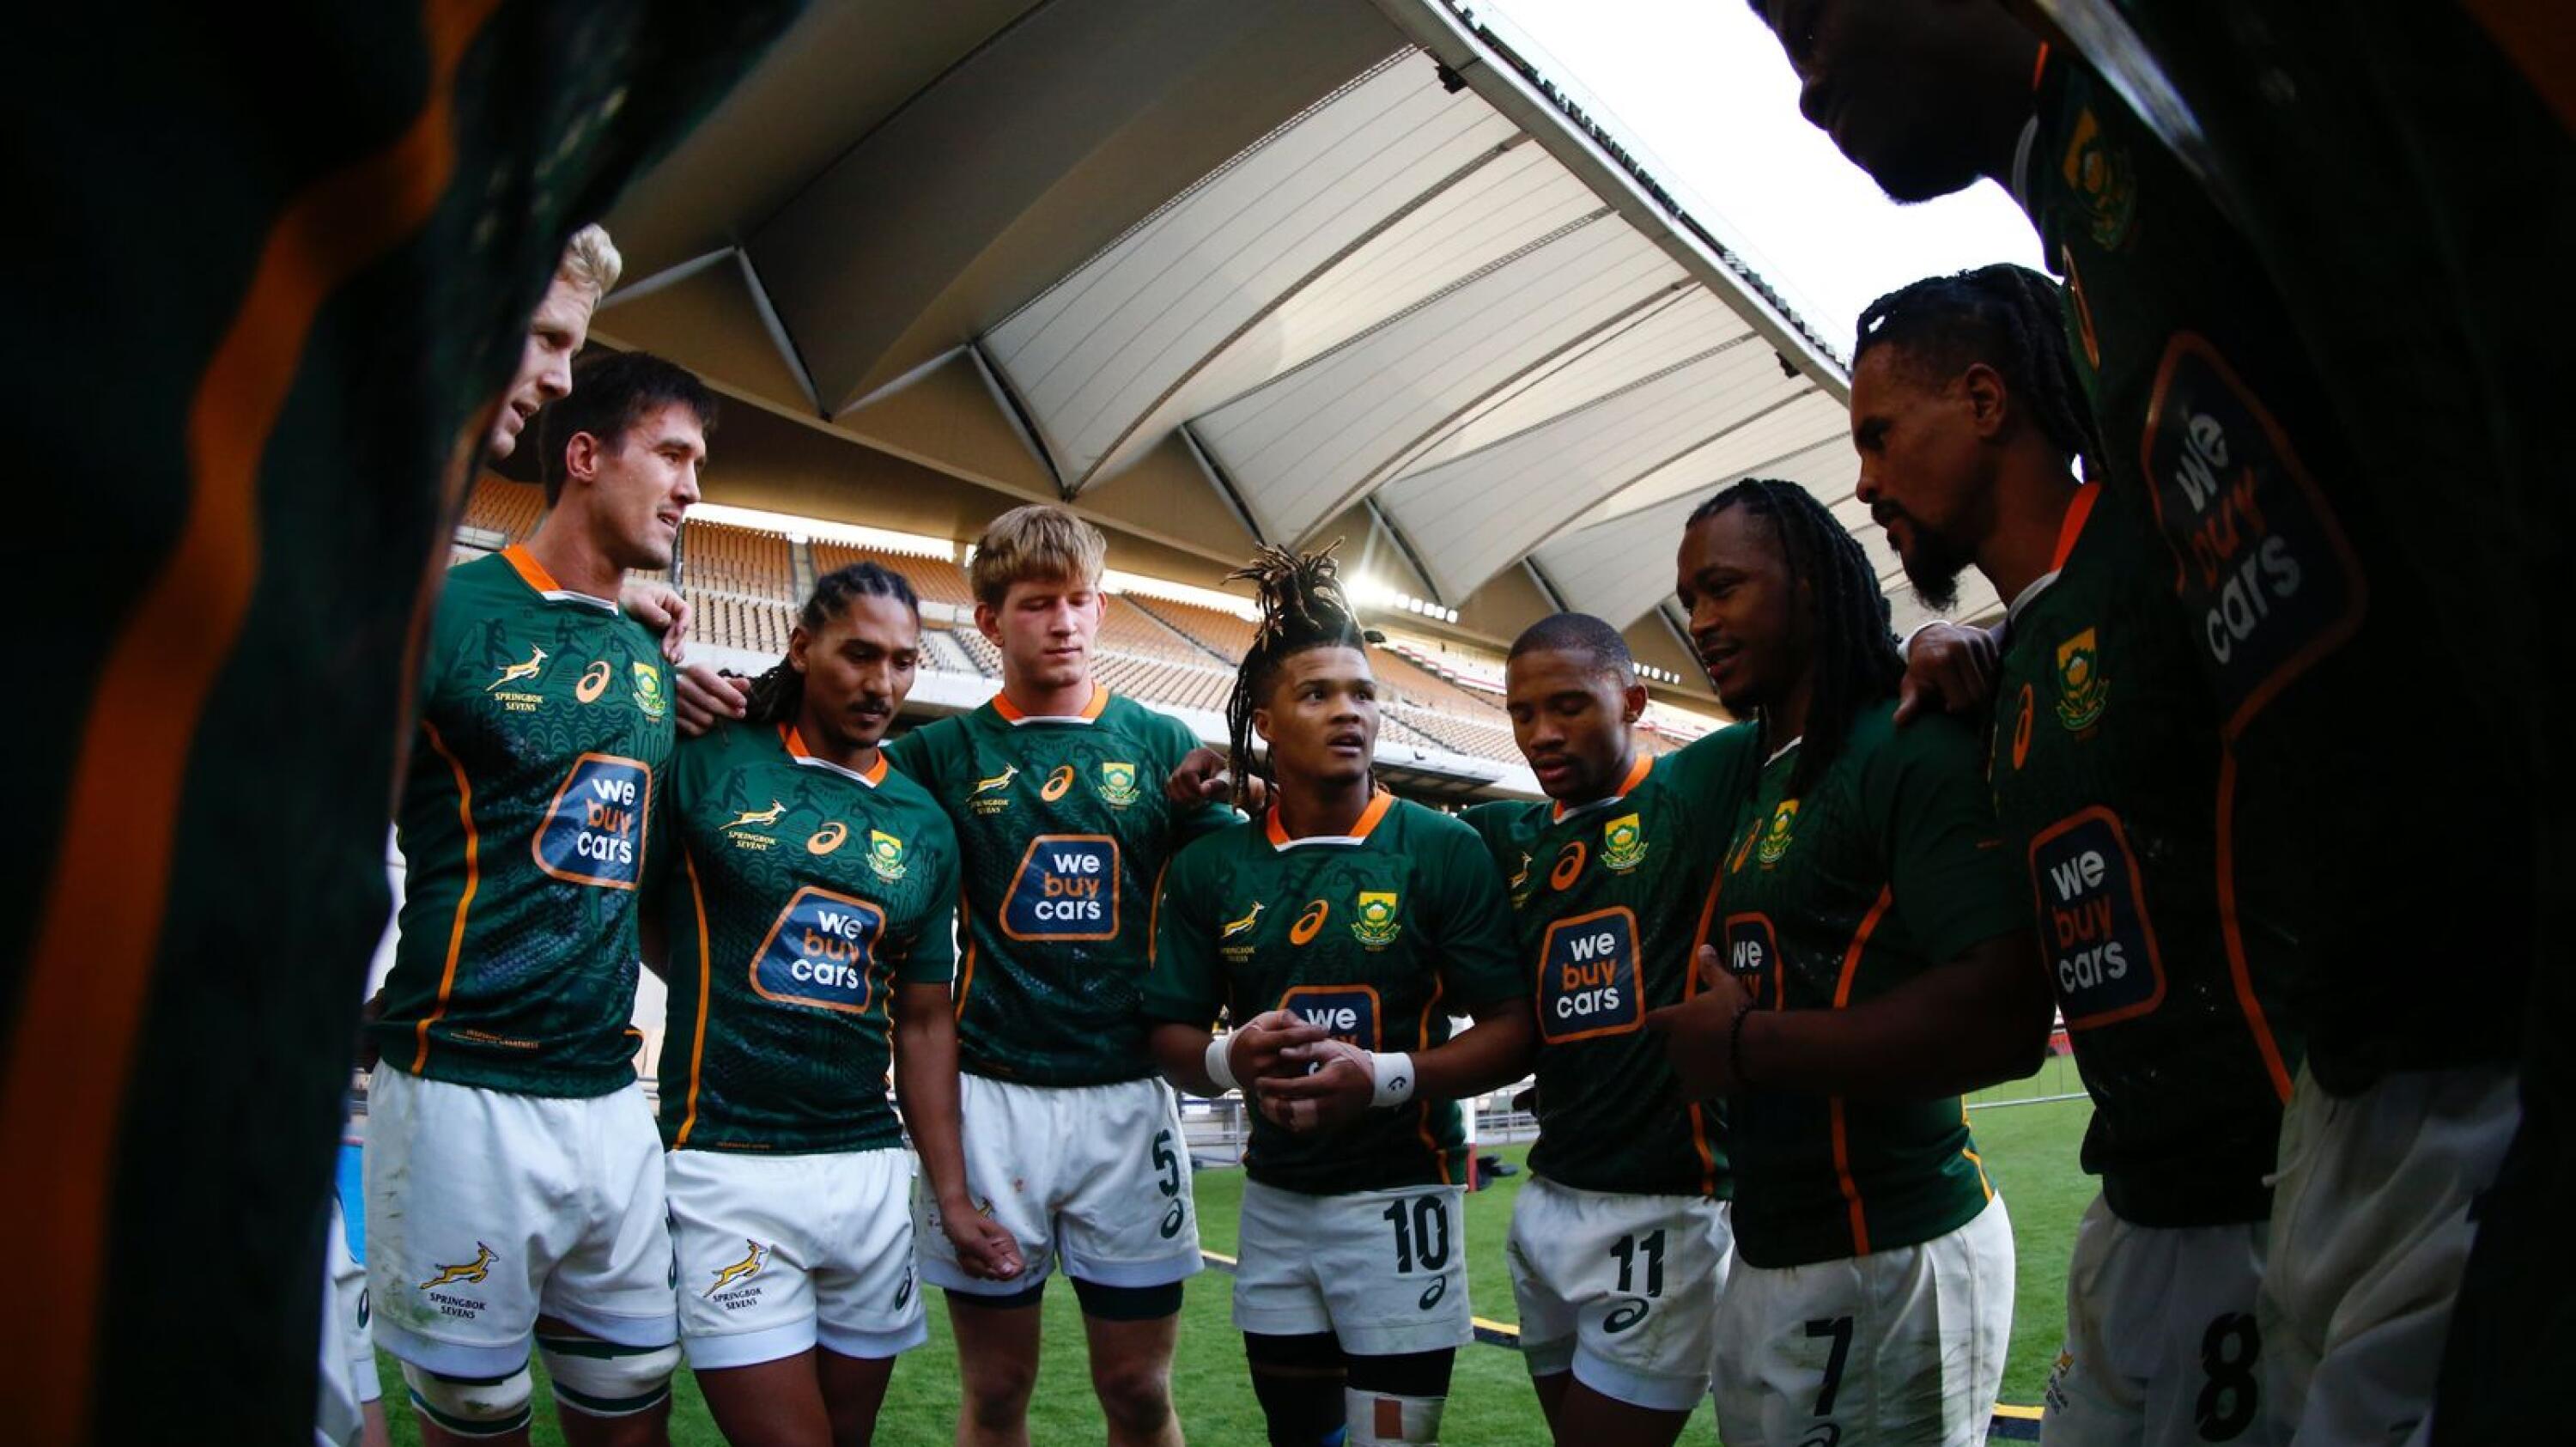 The Blitzboks gather in a huddle ahead of their quarter-final clash against Scotland at the Seville Sevens on Saturday